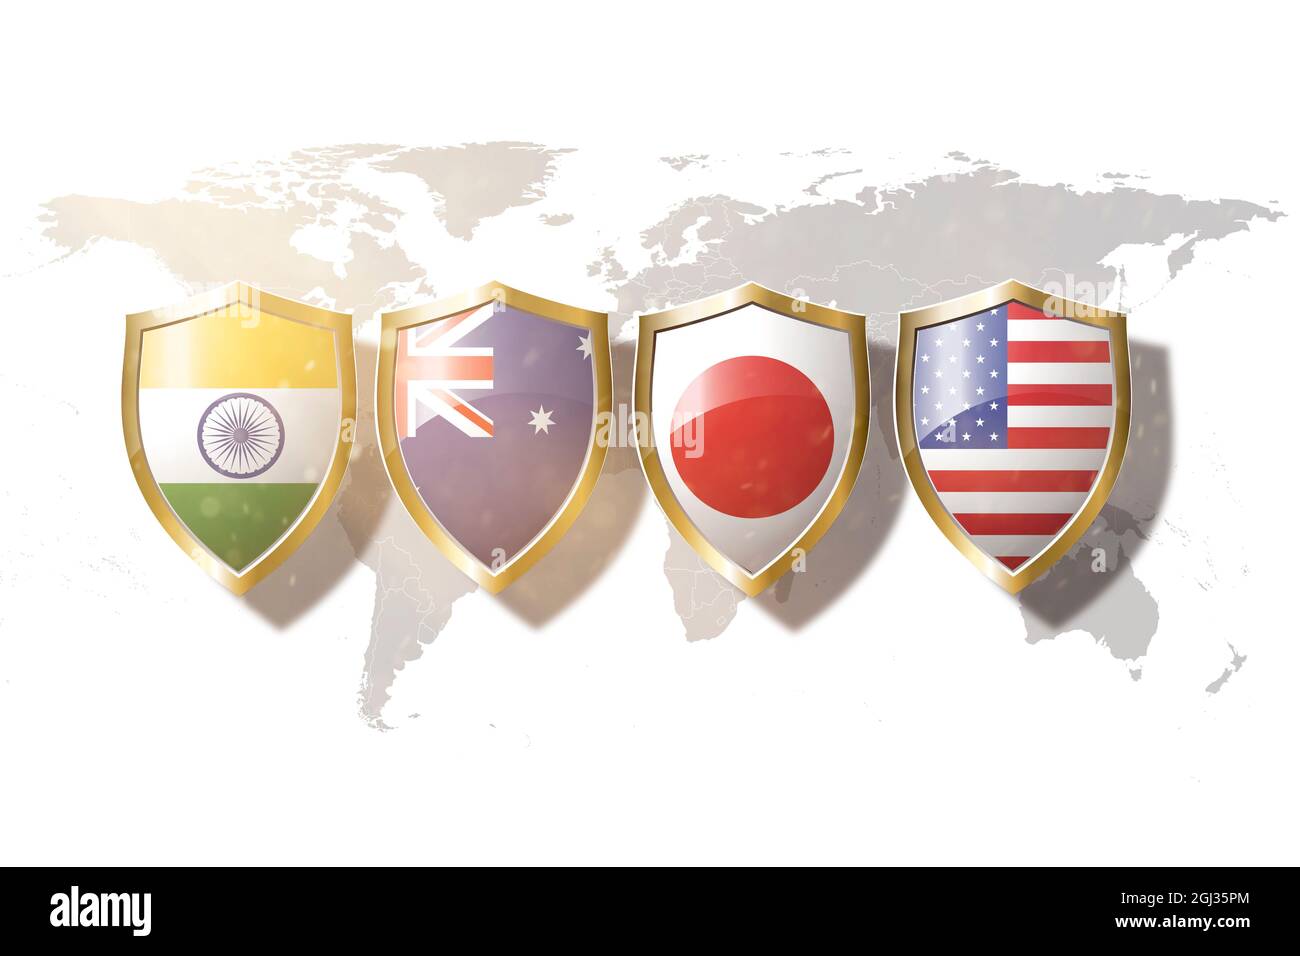 japan,australia,us and india flags in golden shield on world map background. Stock Photo